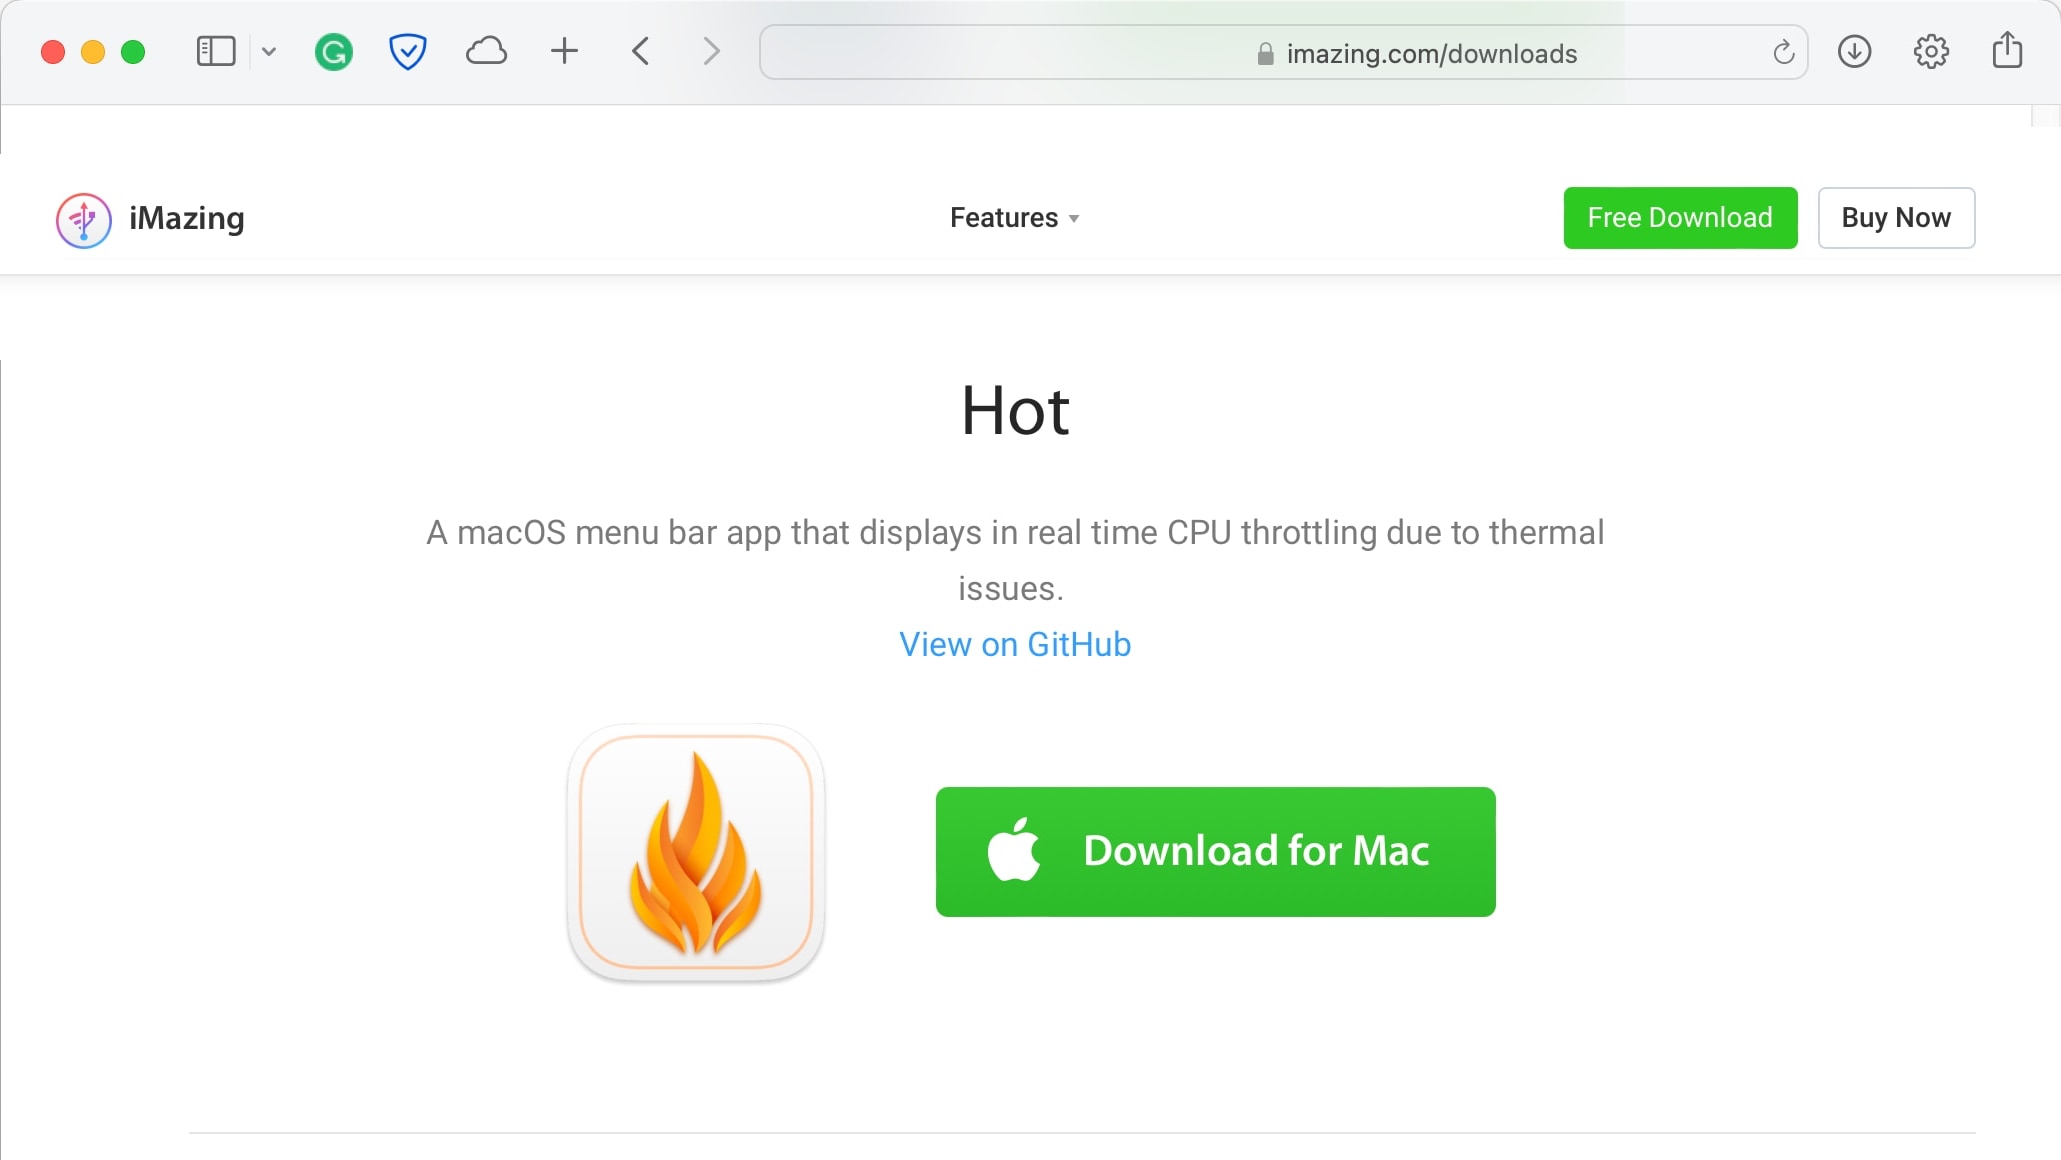 The iMazing website has a free download of the Hot app